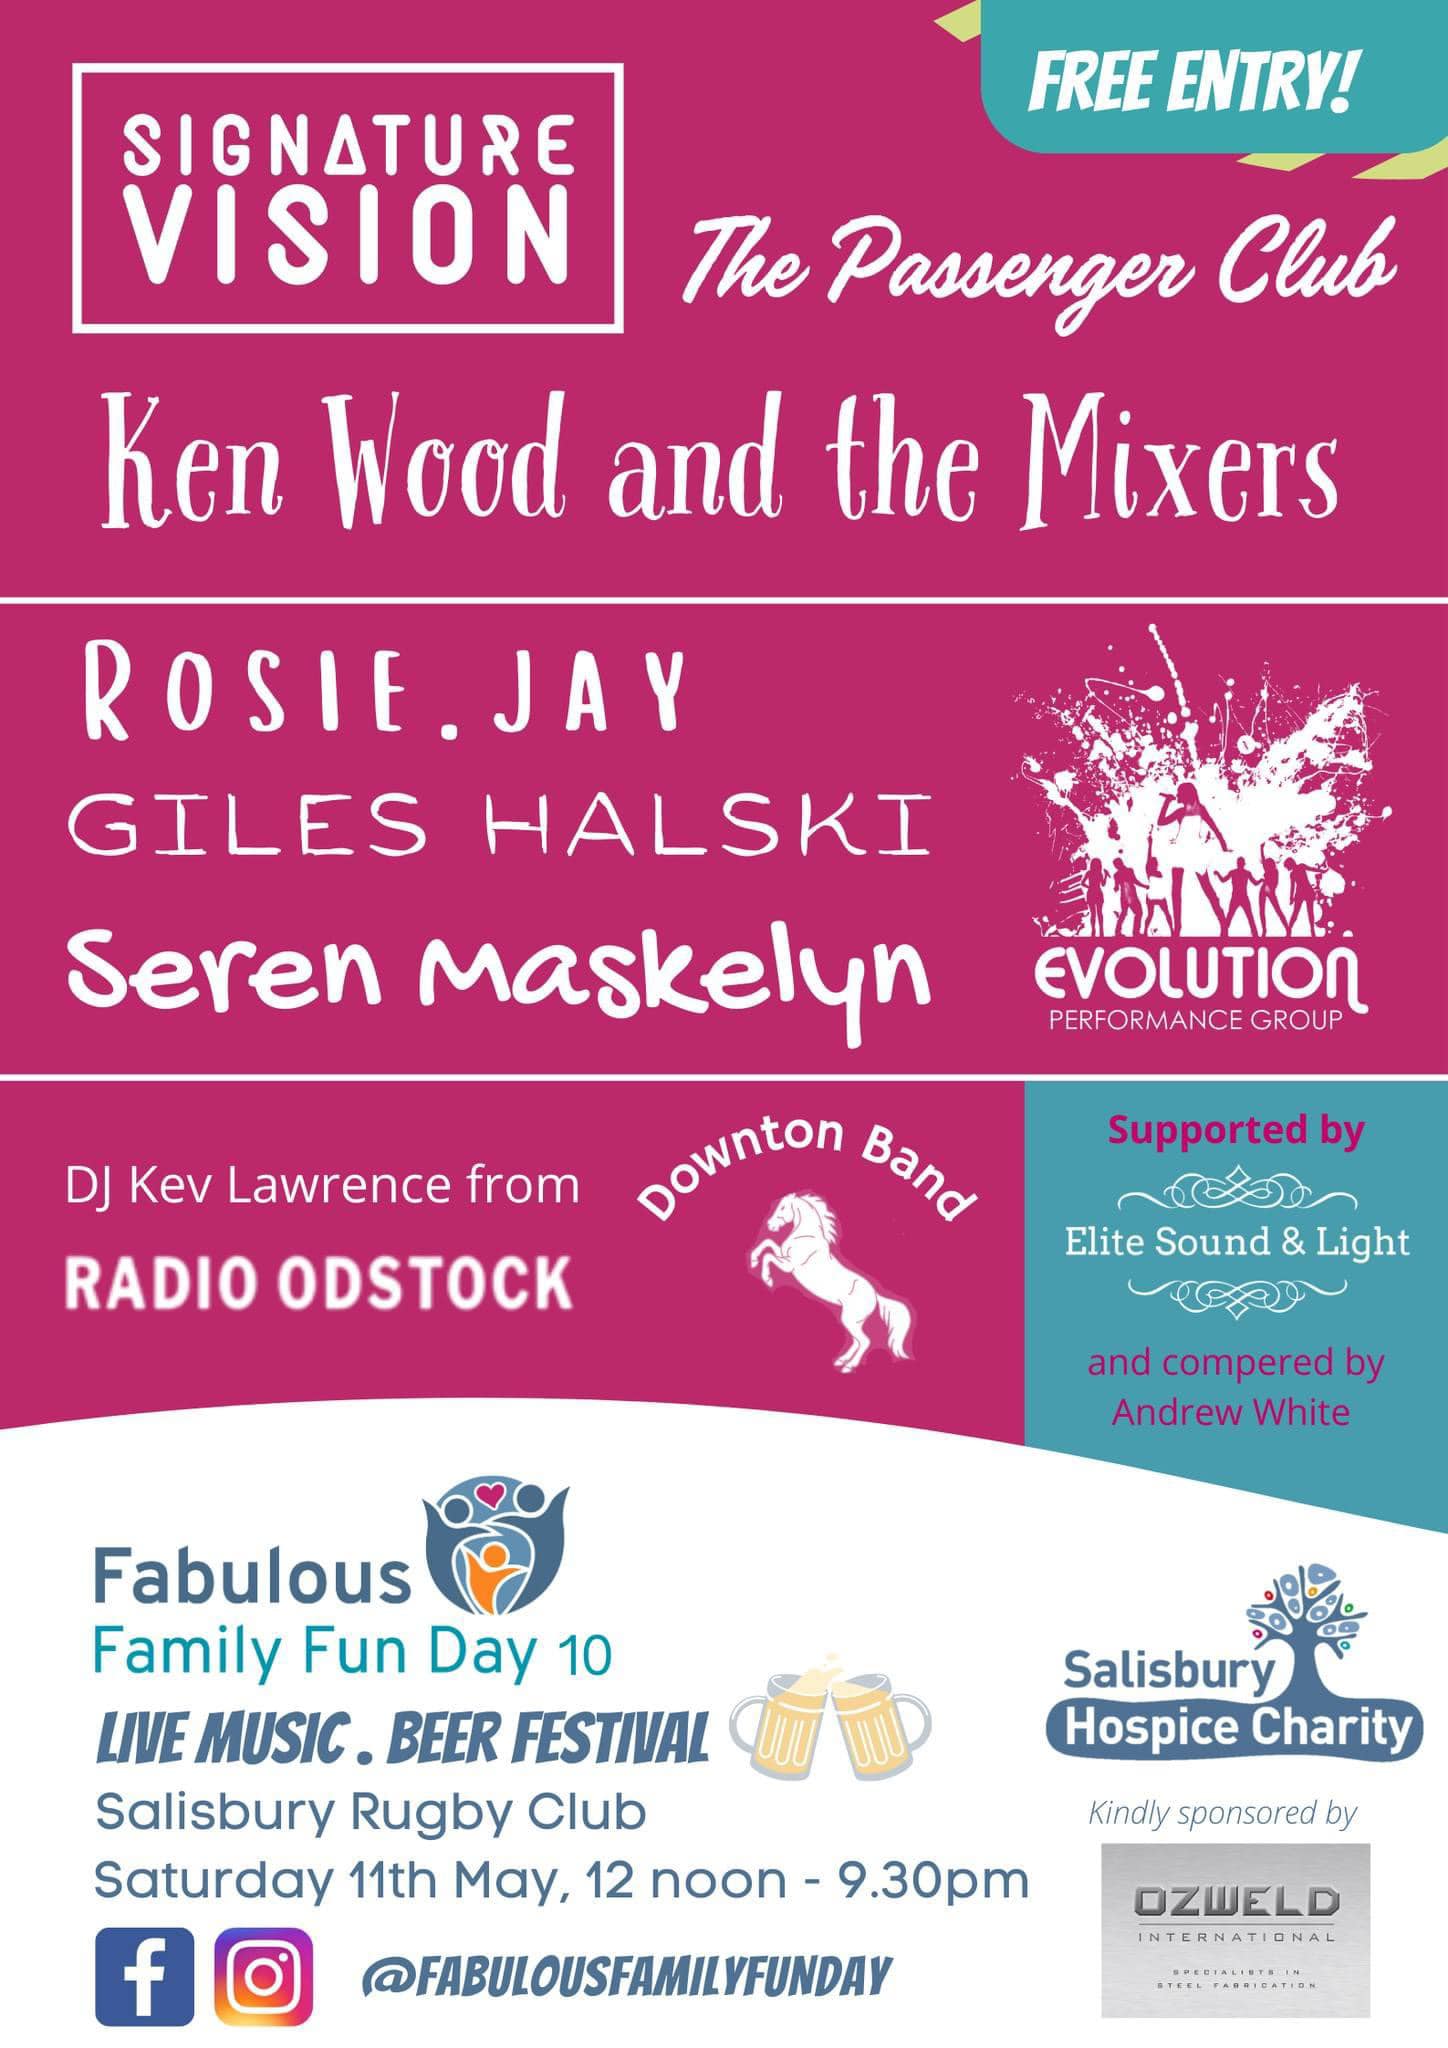 Fabulous Family Fun Day - Signature Vision + The Passenger Club + Rosie Jay + Giles Halski + Seren Maskelyn + Evolution Performance + Downton Band